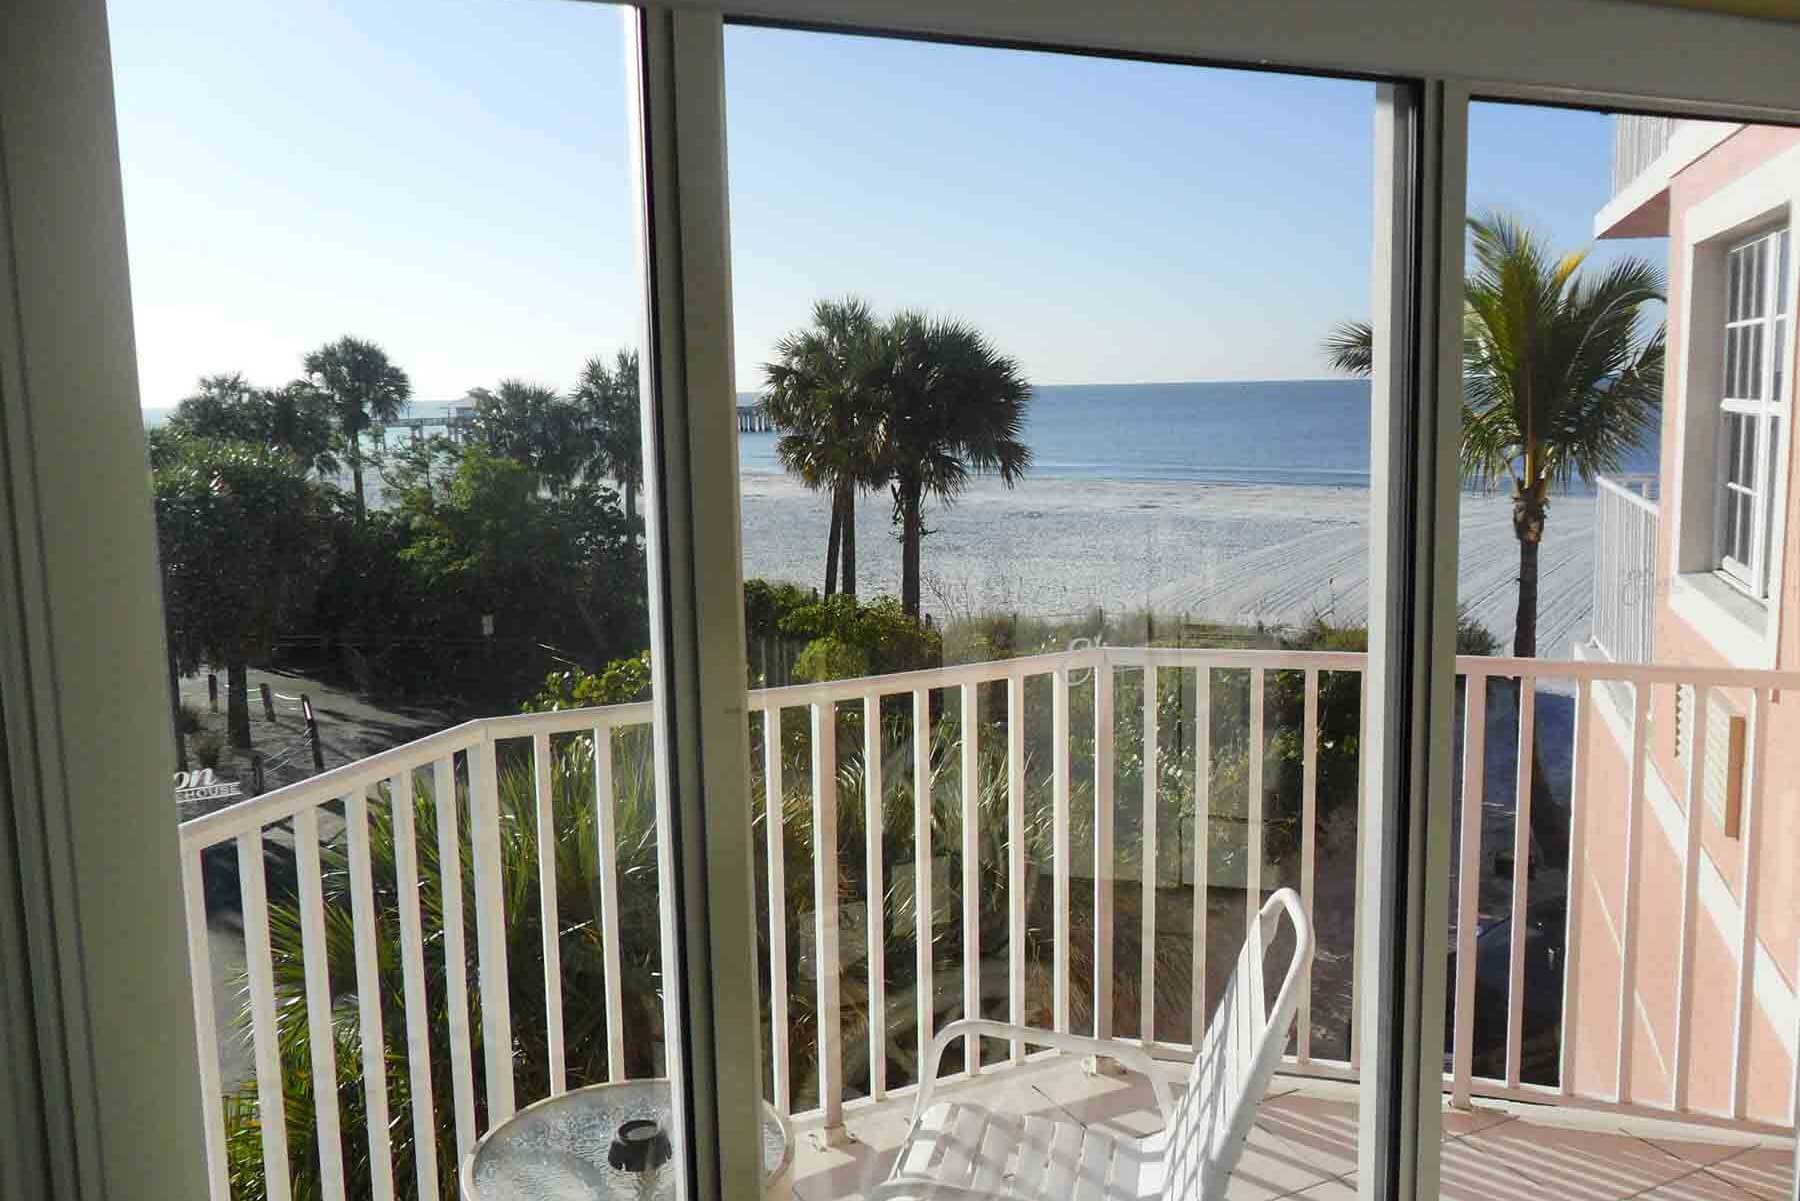 Photo of a balcony overlooking one of the Best Beaches in Fort Myers Florida